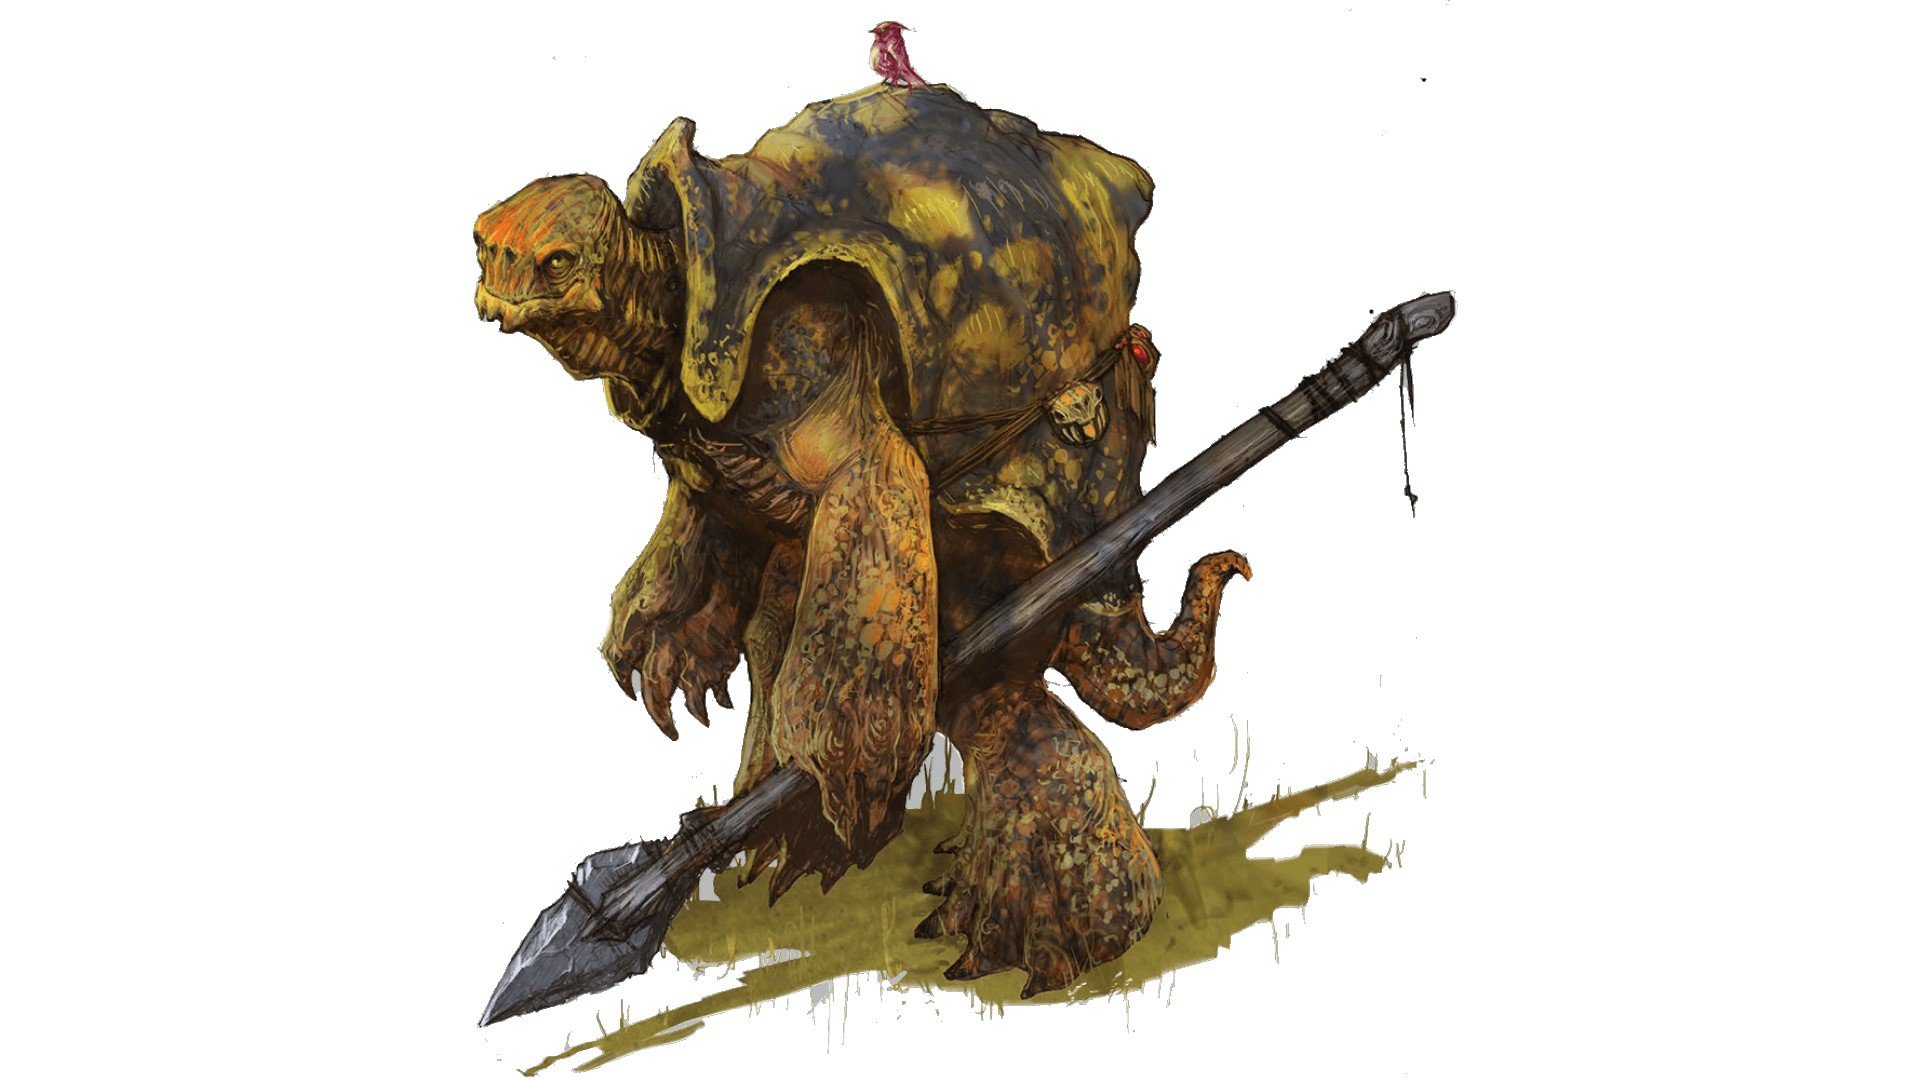 DnD Tortle 5e illustration from Wizards of the Coast